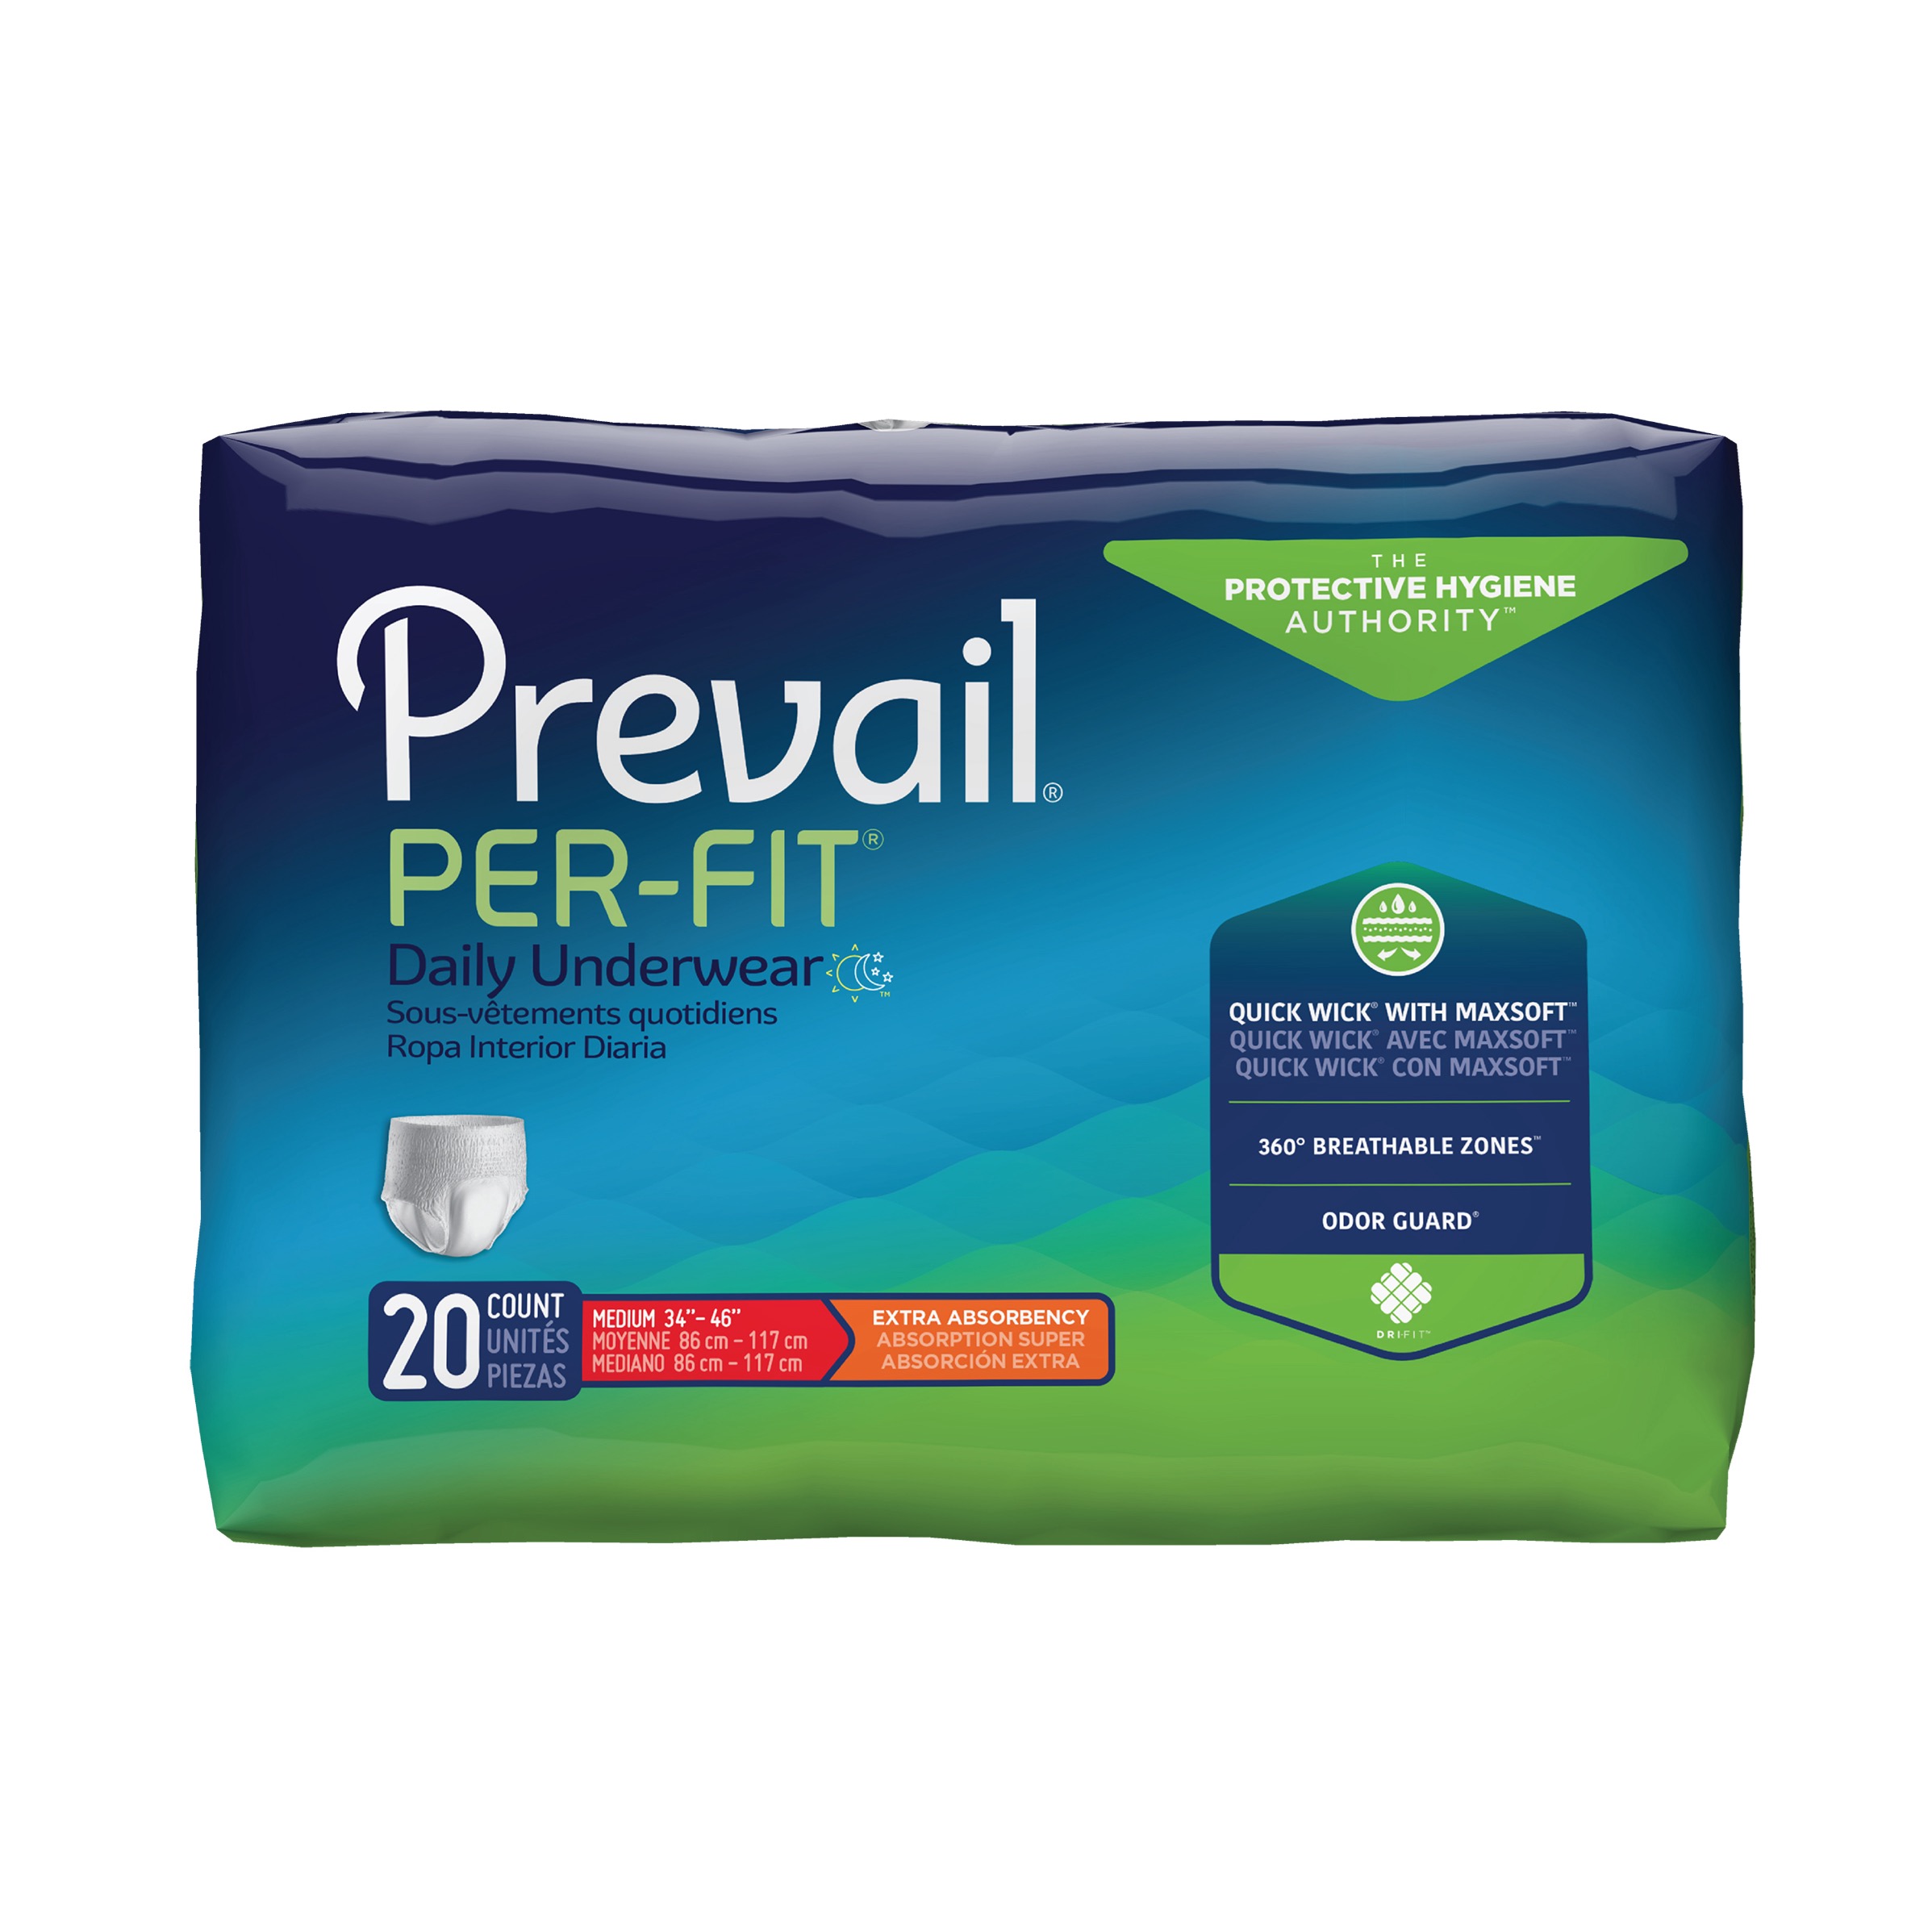 Buy Prevail Per-Fit Extra Absorbency Protective Underwear at